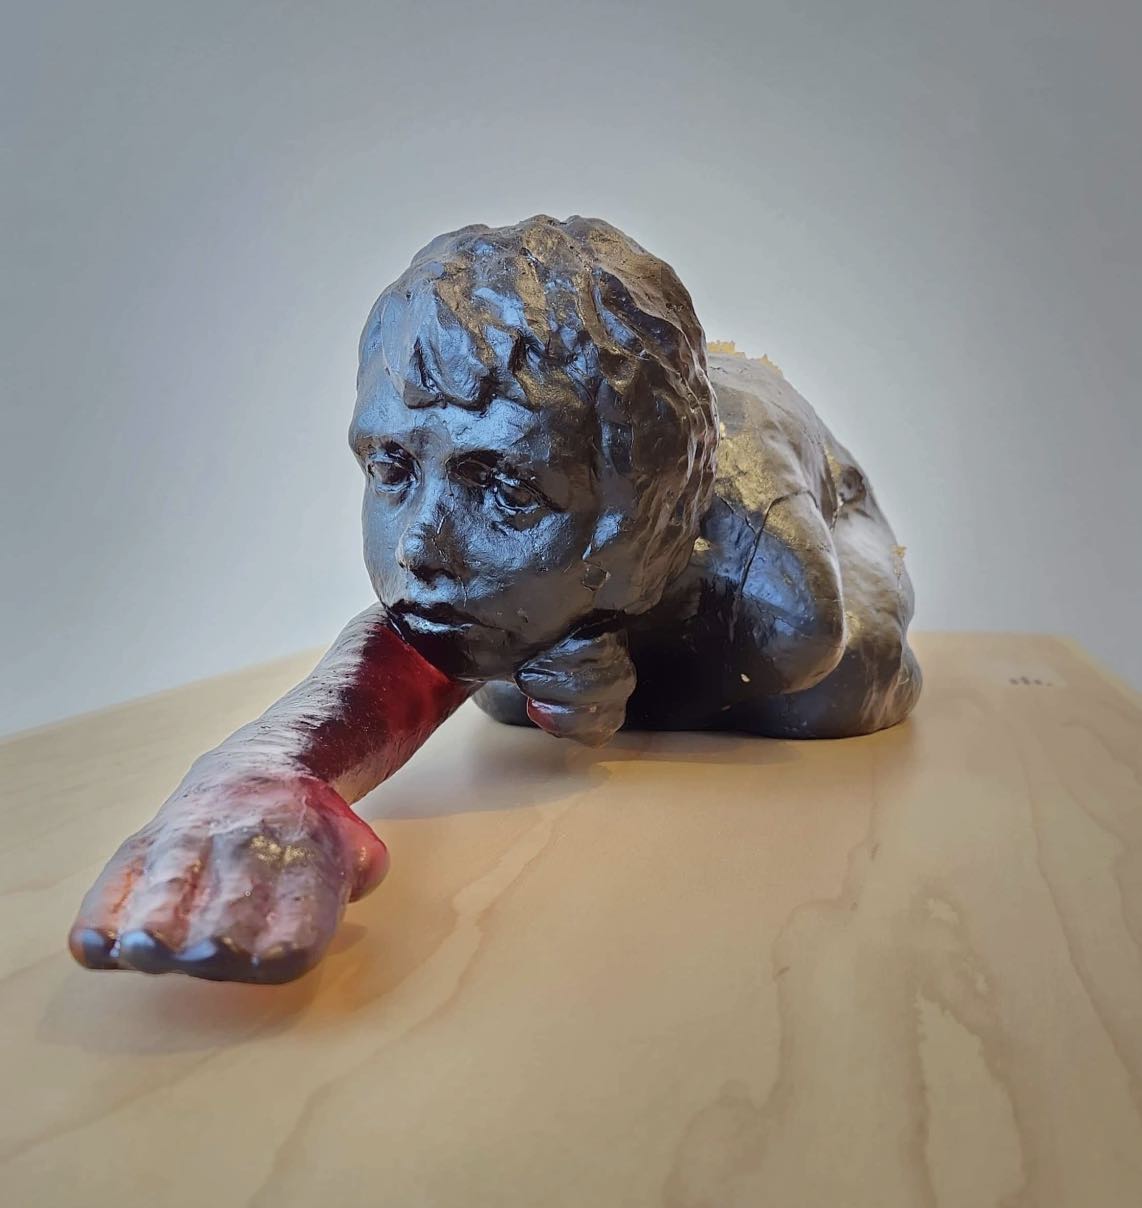 This is a cast glass sculpture. The figure is a young girl, crouched tightly on the ground, knees tucked up under her chest.  One arm is extended forward, delicately exploring the feel of the ground in front of her.  Her other hand supports her chin; on her face is a quizzical, slightly concerned expression of intense concentration.  The figure is 27” from fingertip to toes, and cast in a dark amber-coloured glass.